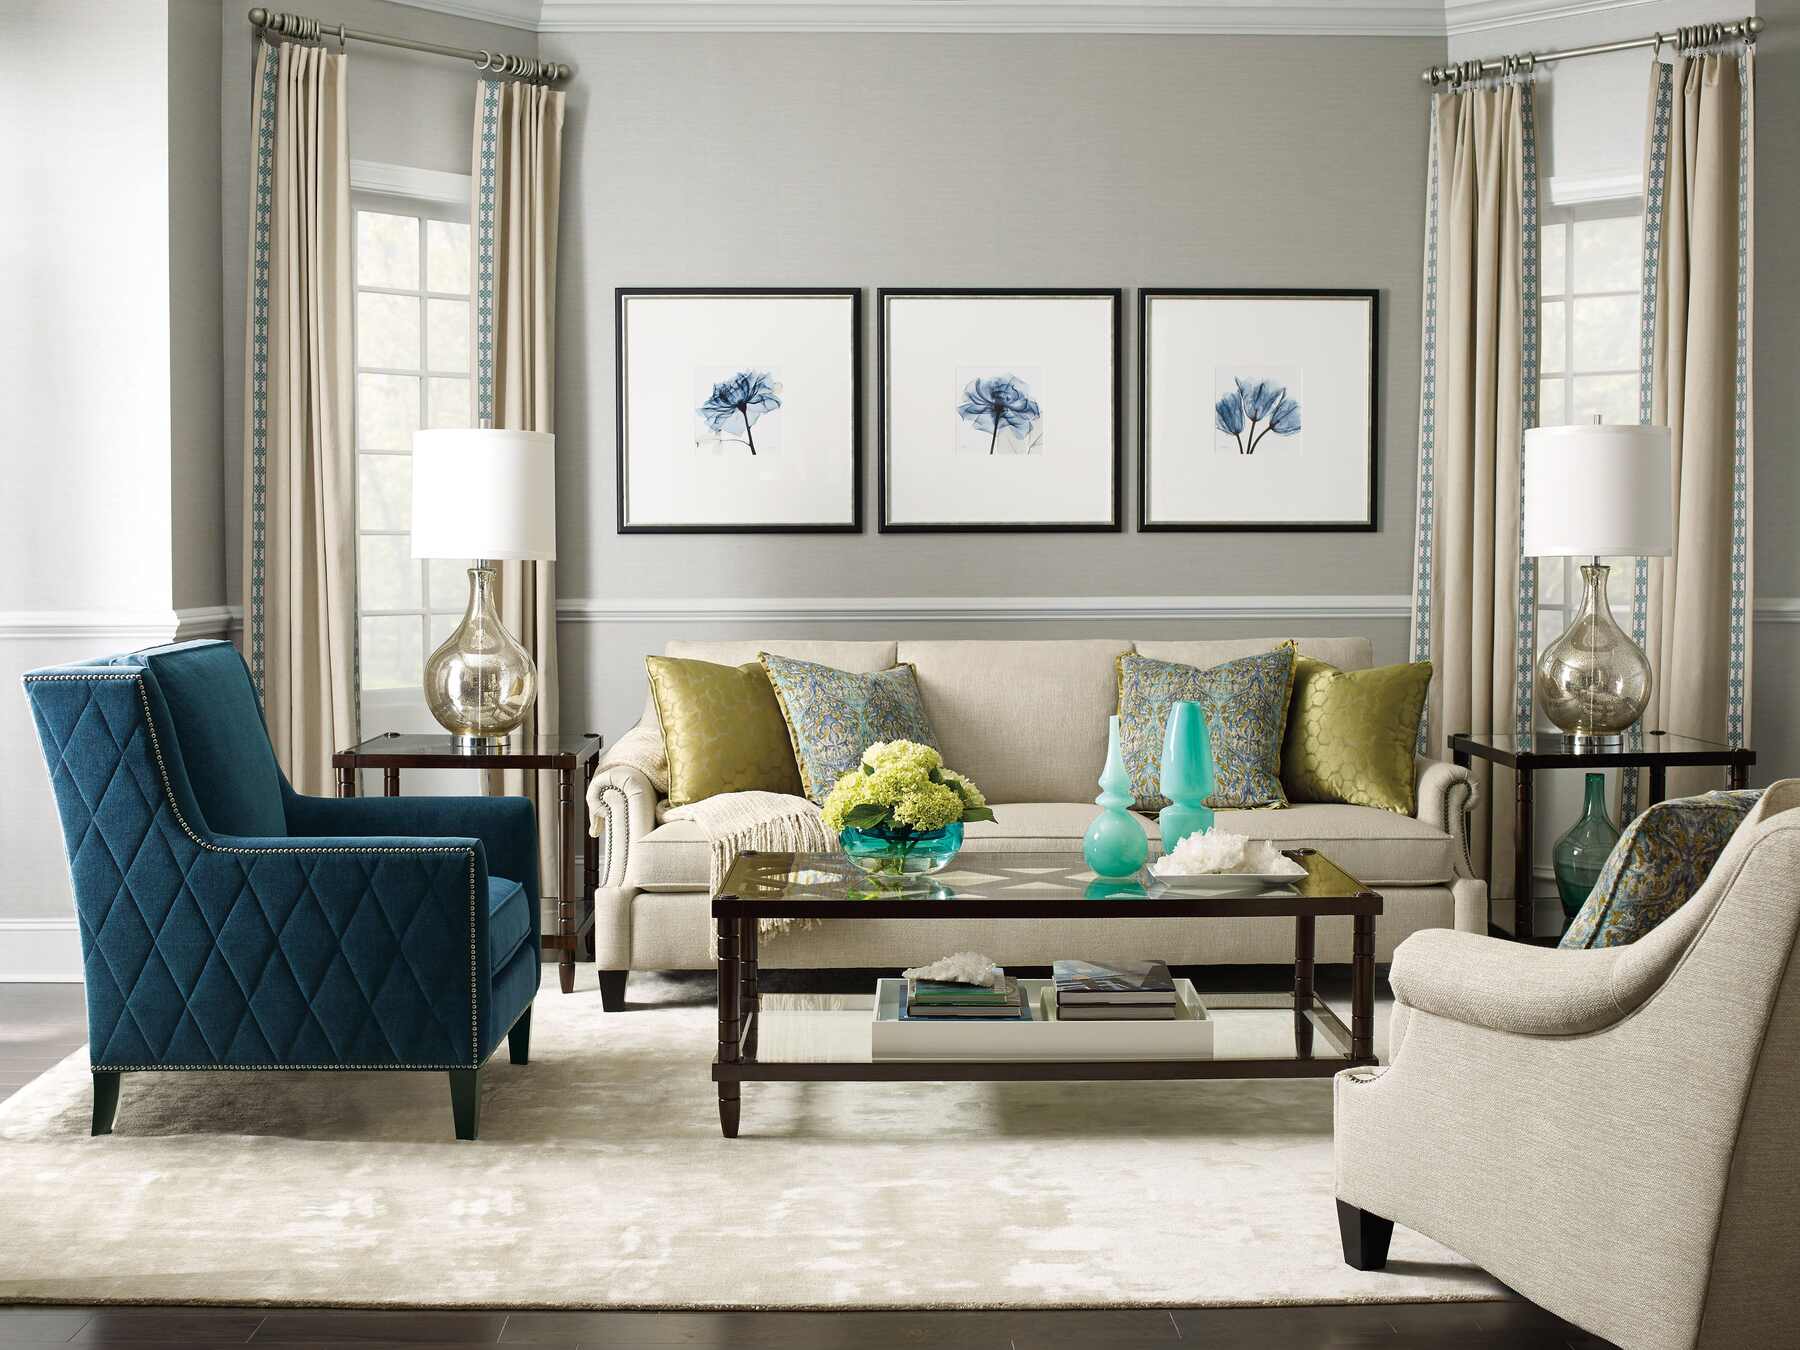 A stylish living room featuring blue and green furniture, adding a pop of color to the space